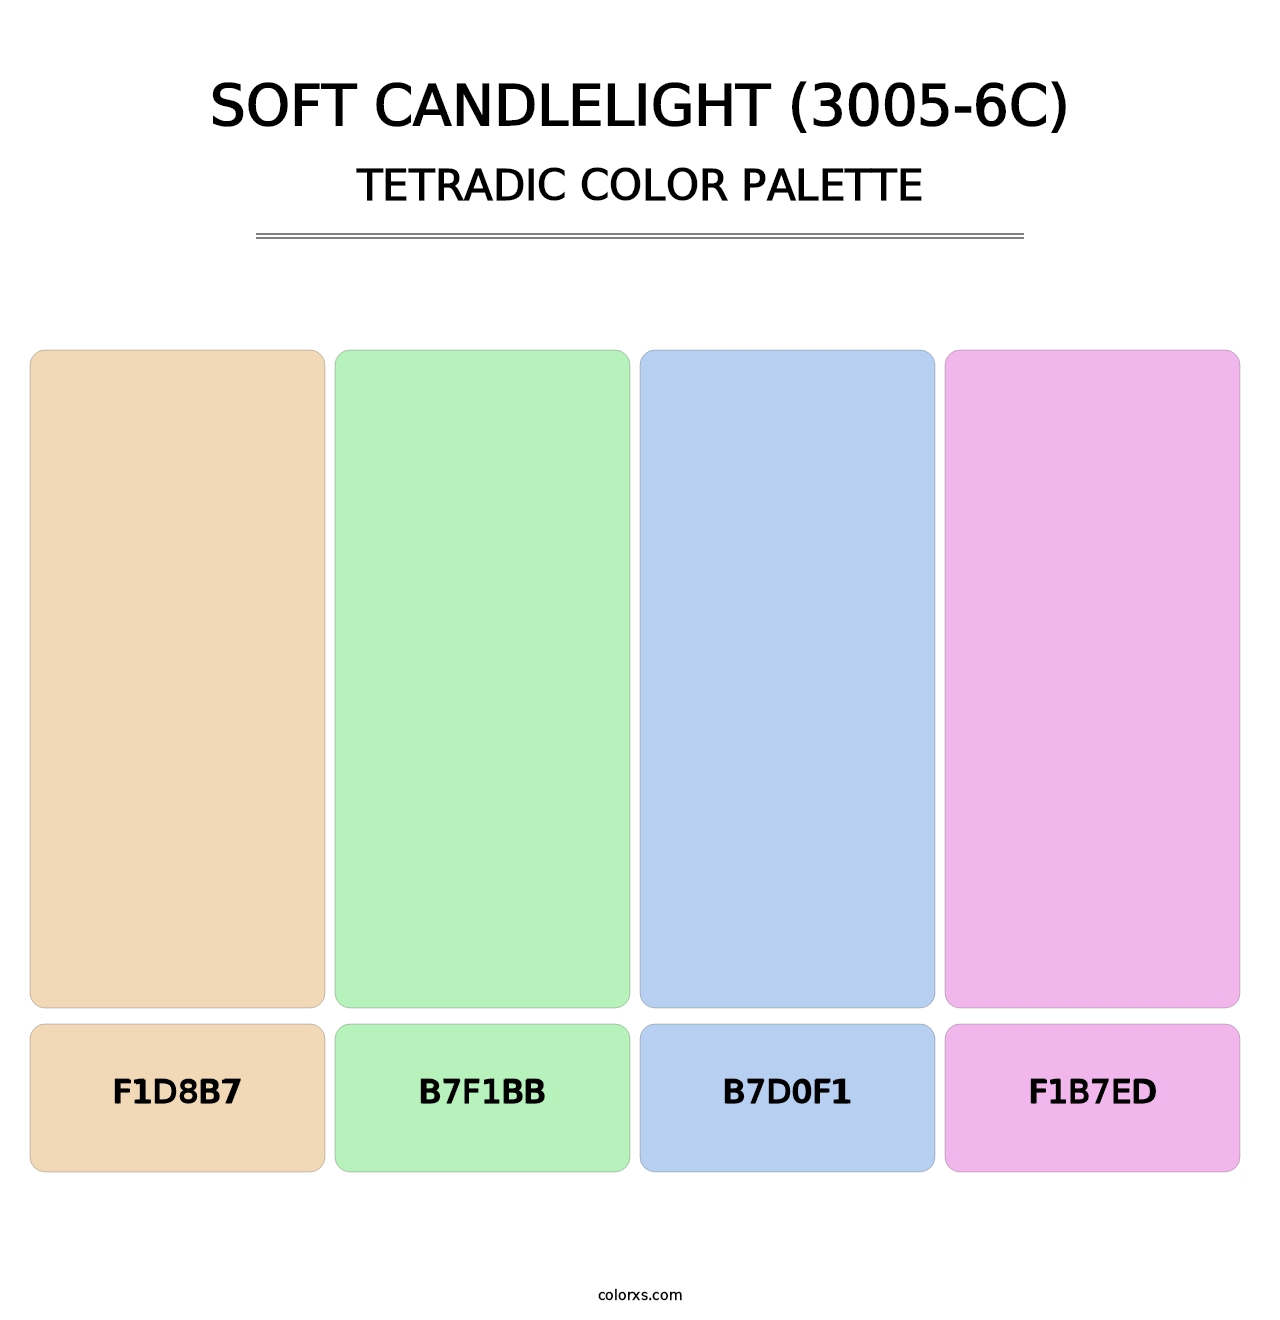 Soft Candlelight (3005-6C) - Tetradic Color Palette